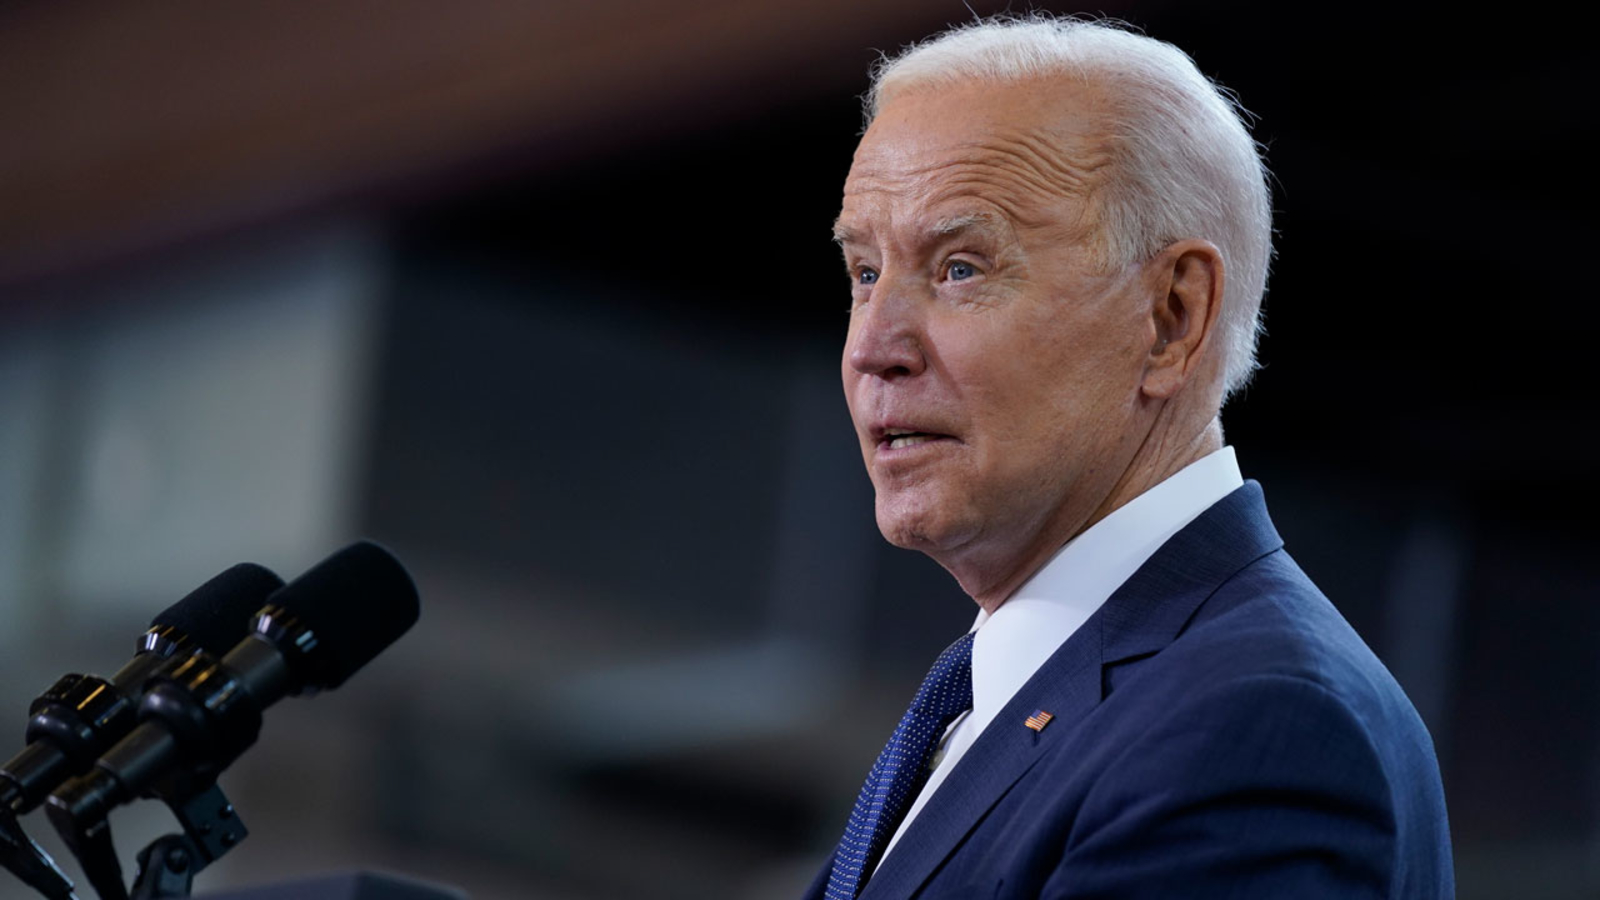 Biden will raise taxes for companies, as cited by Amazon as an example